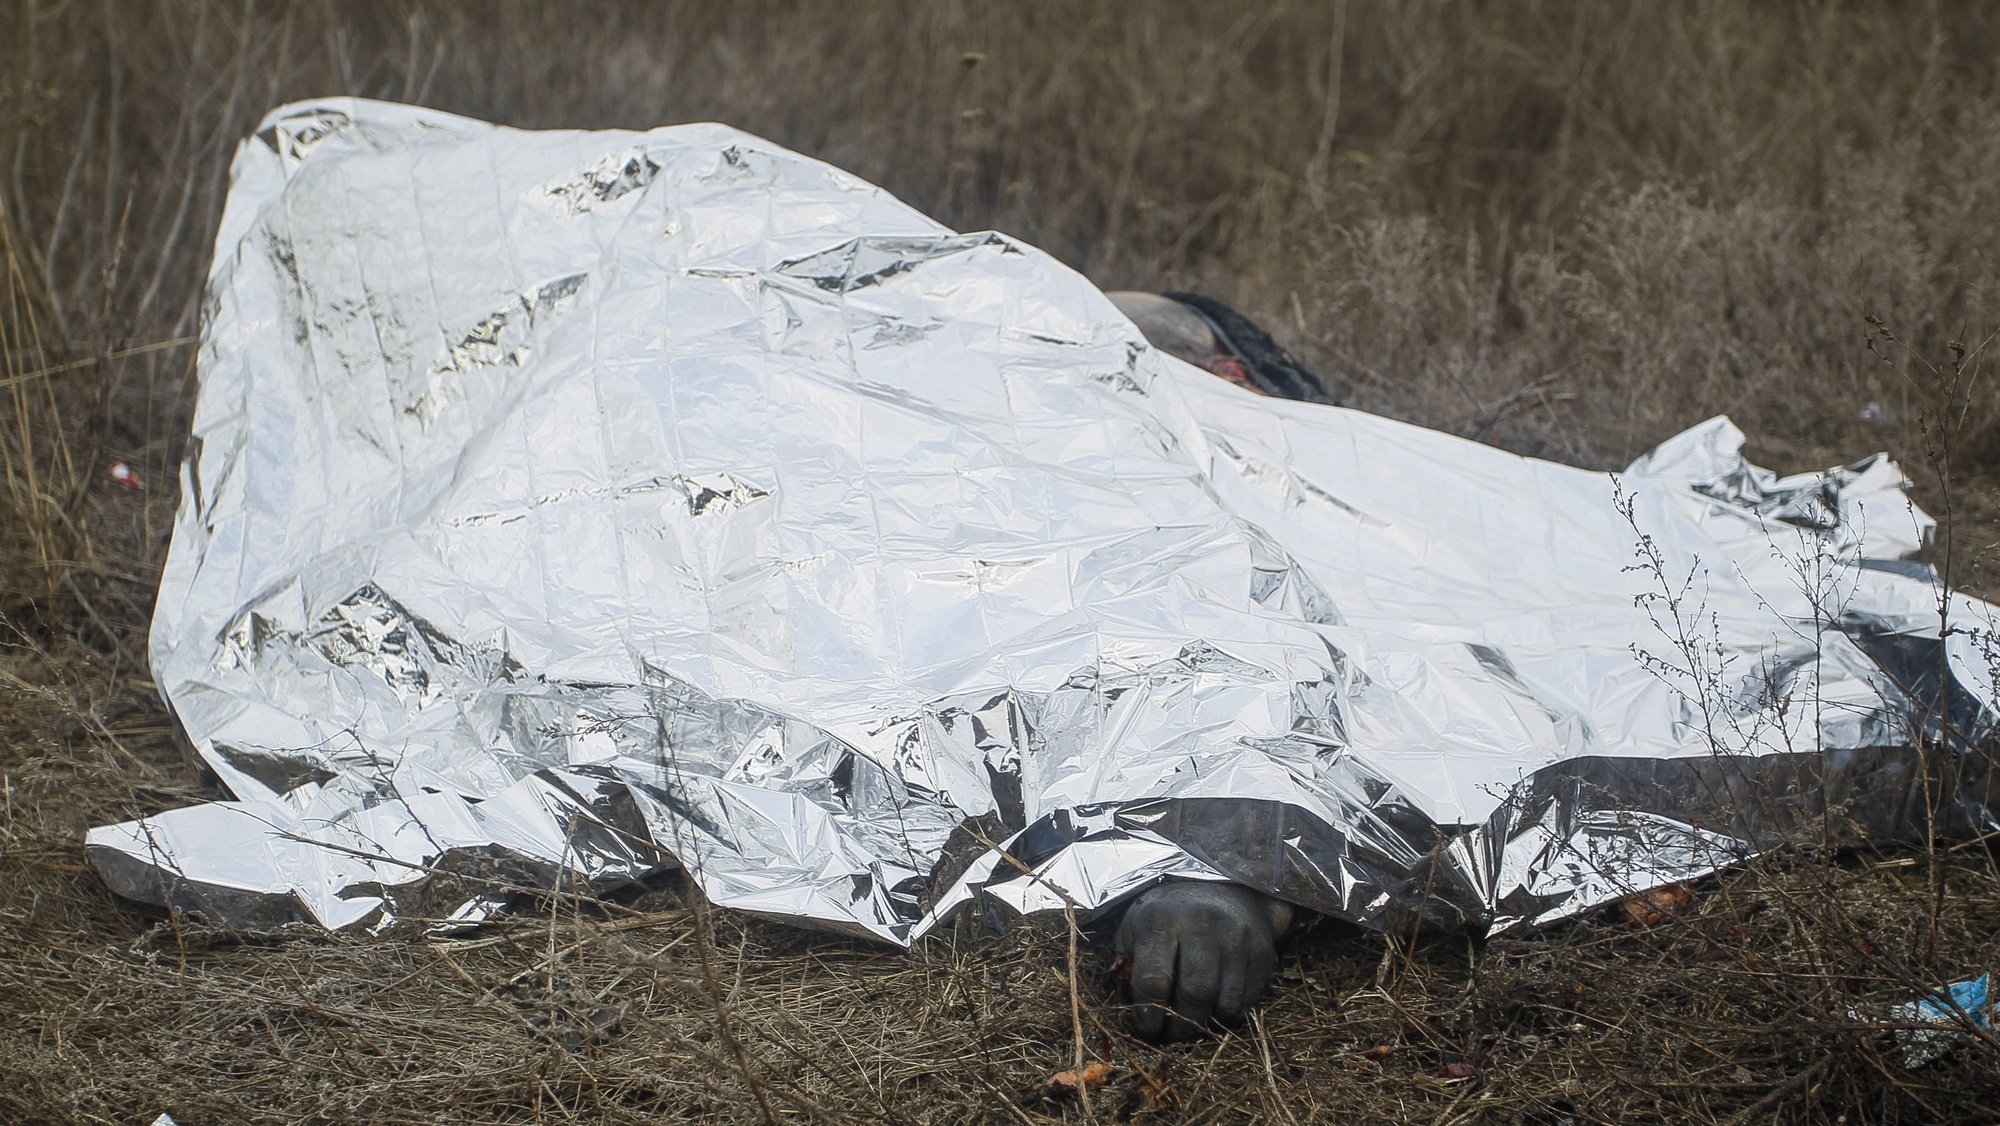 epa05152955 A covered body of a victim following an explosion that hit a minibus close to Maryinka town, near Donetsk, Ukraine, 10 February 2016. Four people were killed in a land mine blast near the Maryinka checkpoint. The civilian vehicle with five people was heading from the militant-held city of Donetsk to the town of Maryinka in the so-called &#039;grey zone&#039; and hit a land mine about 600 meters from the checkpoint while bypassing a queue. The driver ignored land mine warning signs and tried to drive off to the roadside, where the minibus hit the land mine, according to local media reports.  EPA/ALEXANDER ERMOCHENKO